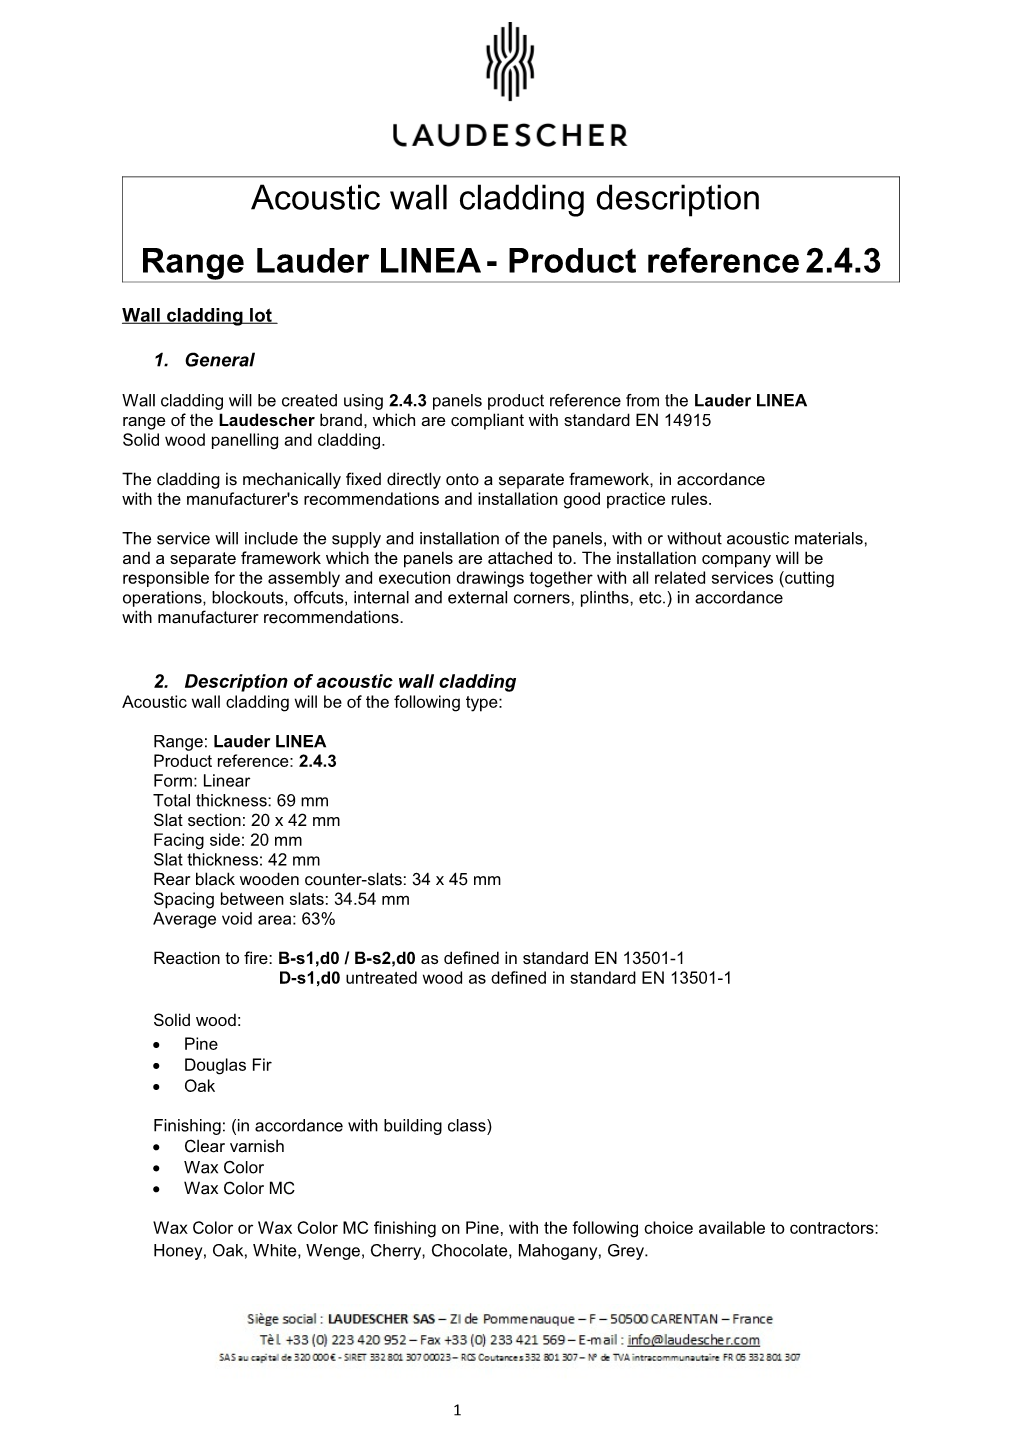 Range Lauder LINEA - Product Reference 2.4.3